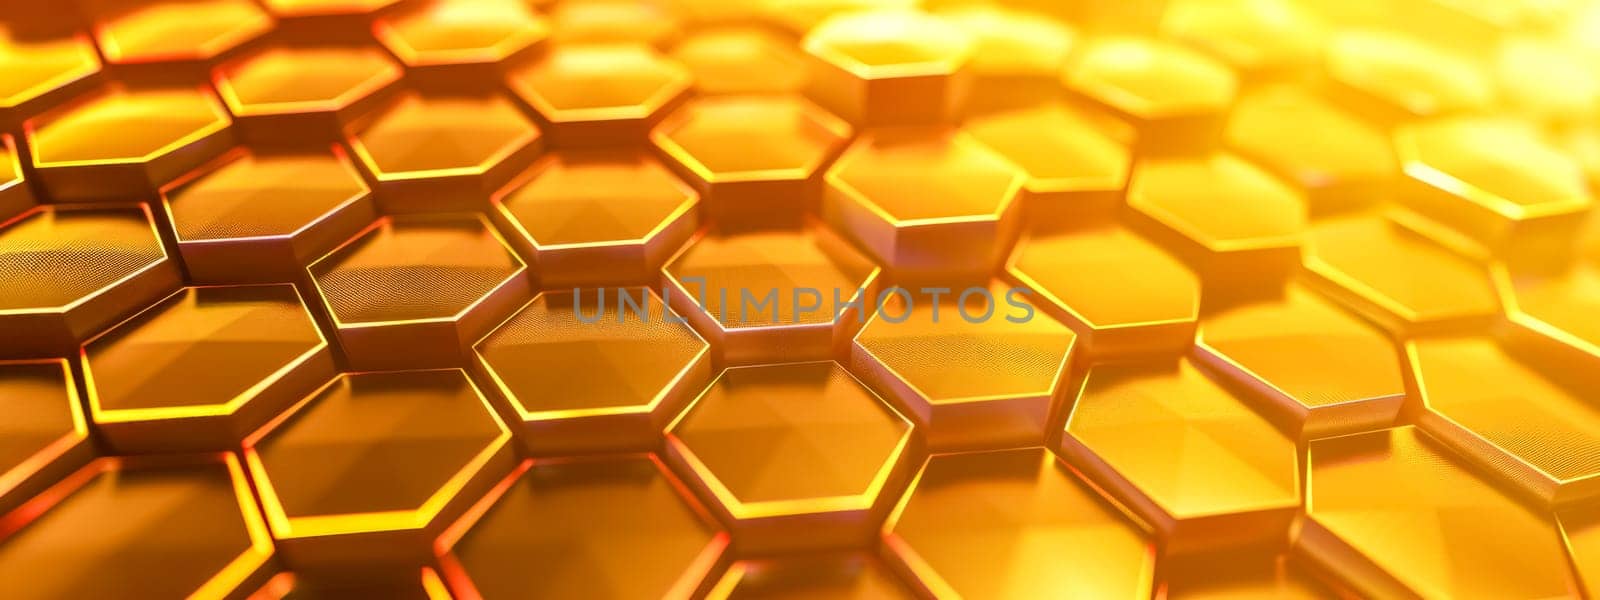 Luxurious golden hexagonal pattern background with metallic abstract geometric honeycomb design and seamless shiny modern surface texture